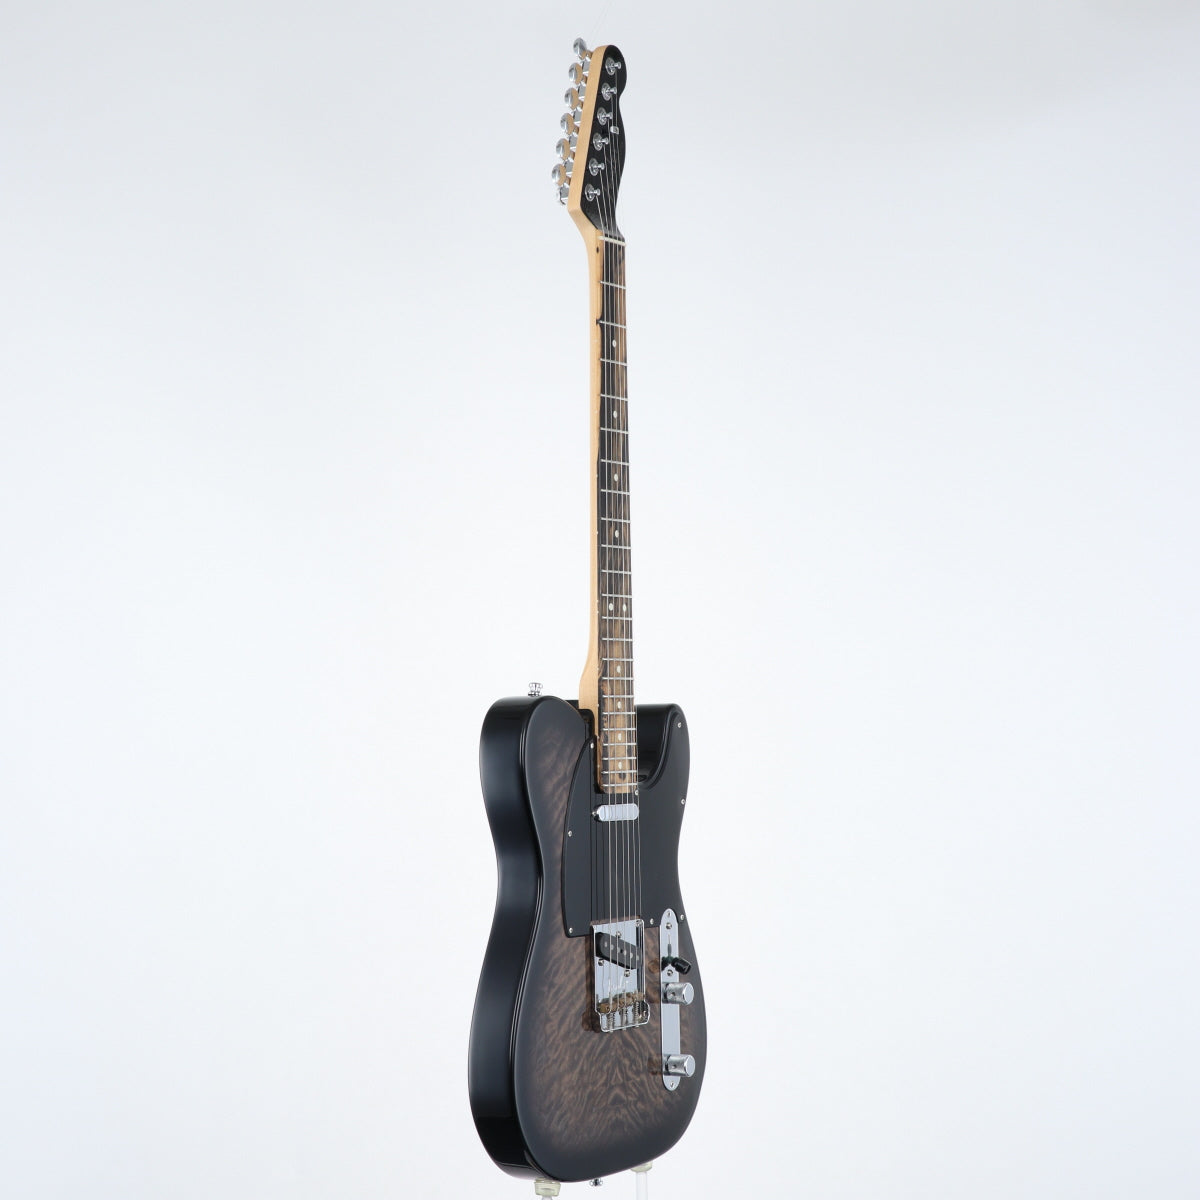 [SN US19087037] USED Fender USA / Limited Edition American QMT Telecaster PME Transparent Black [11]